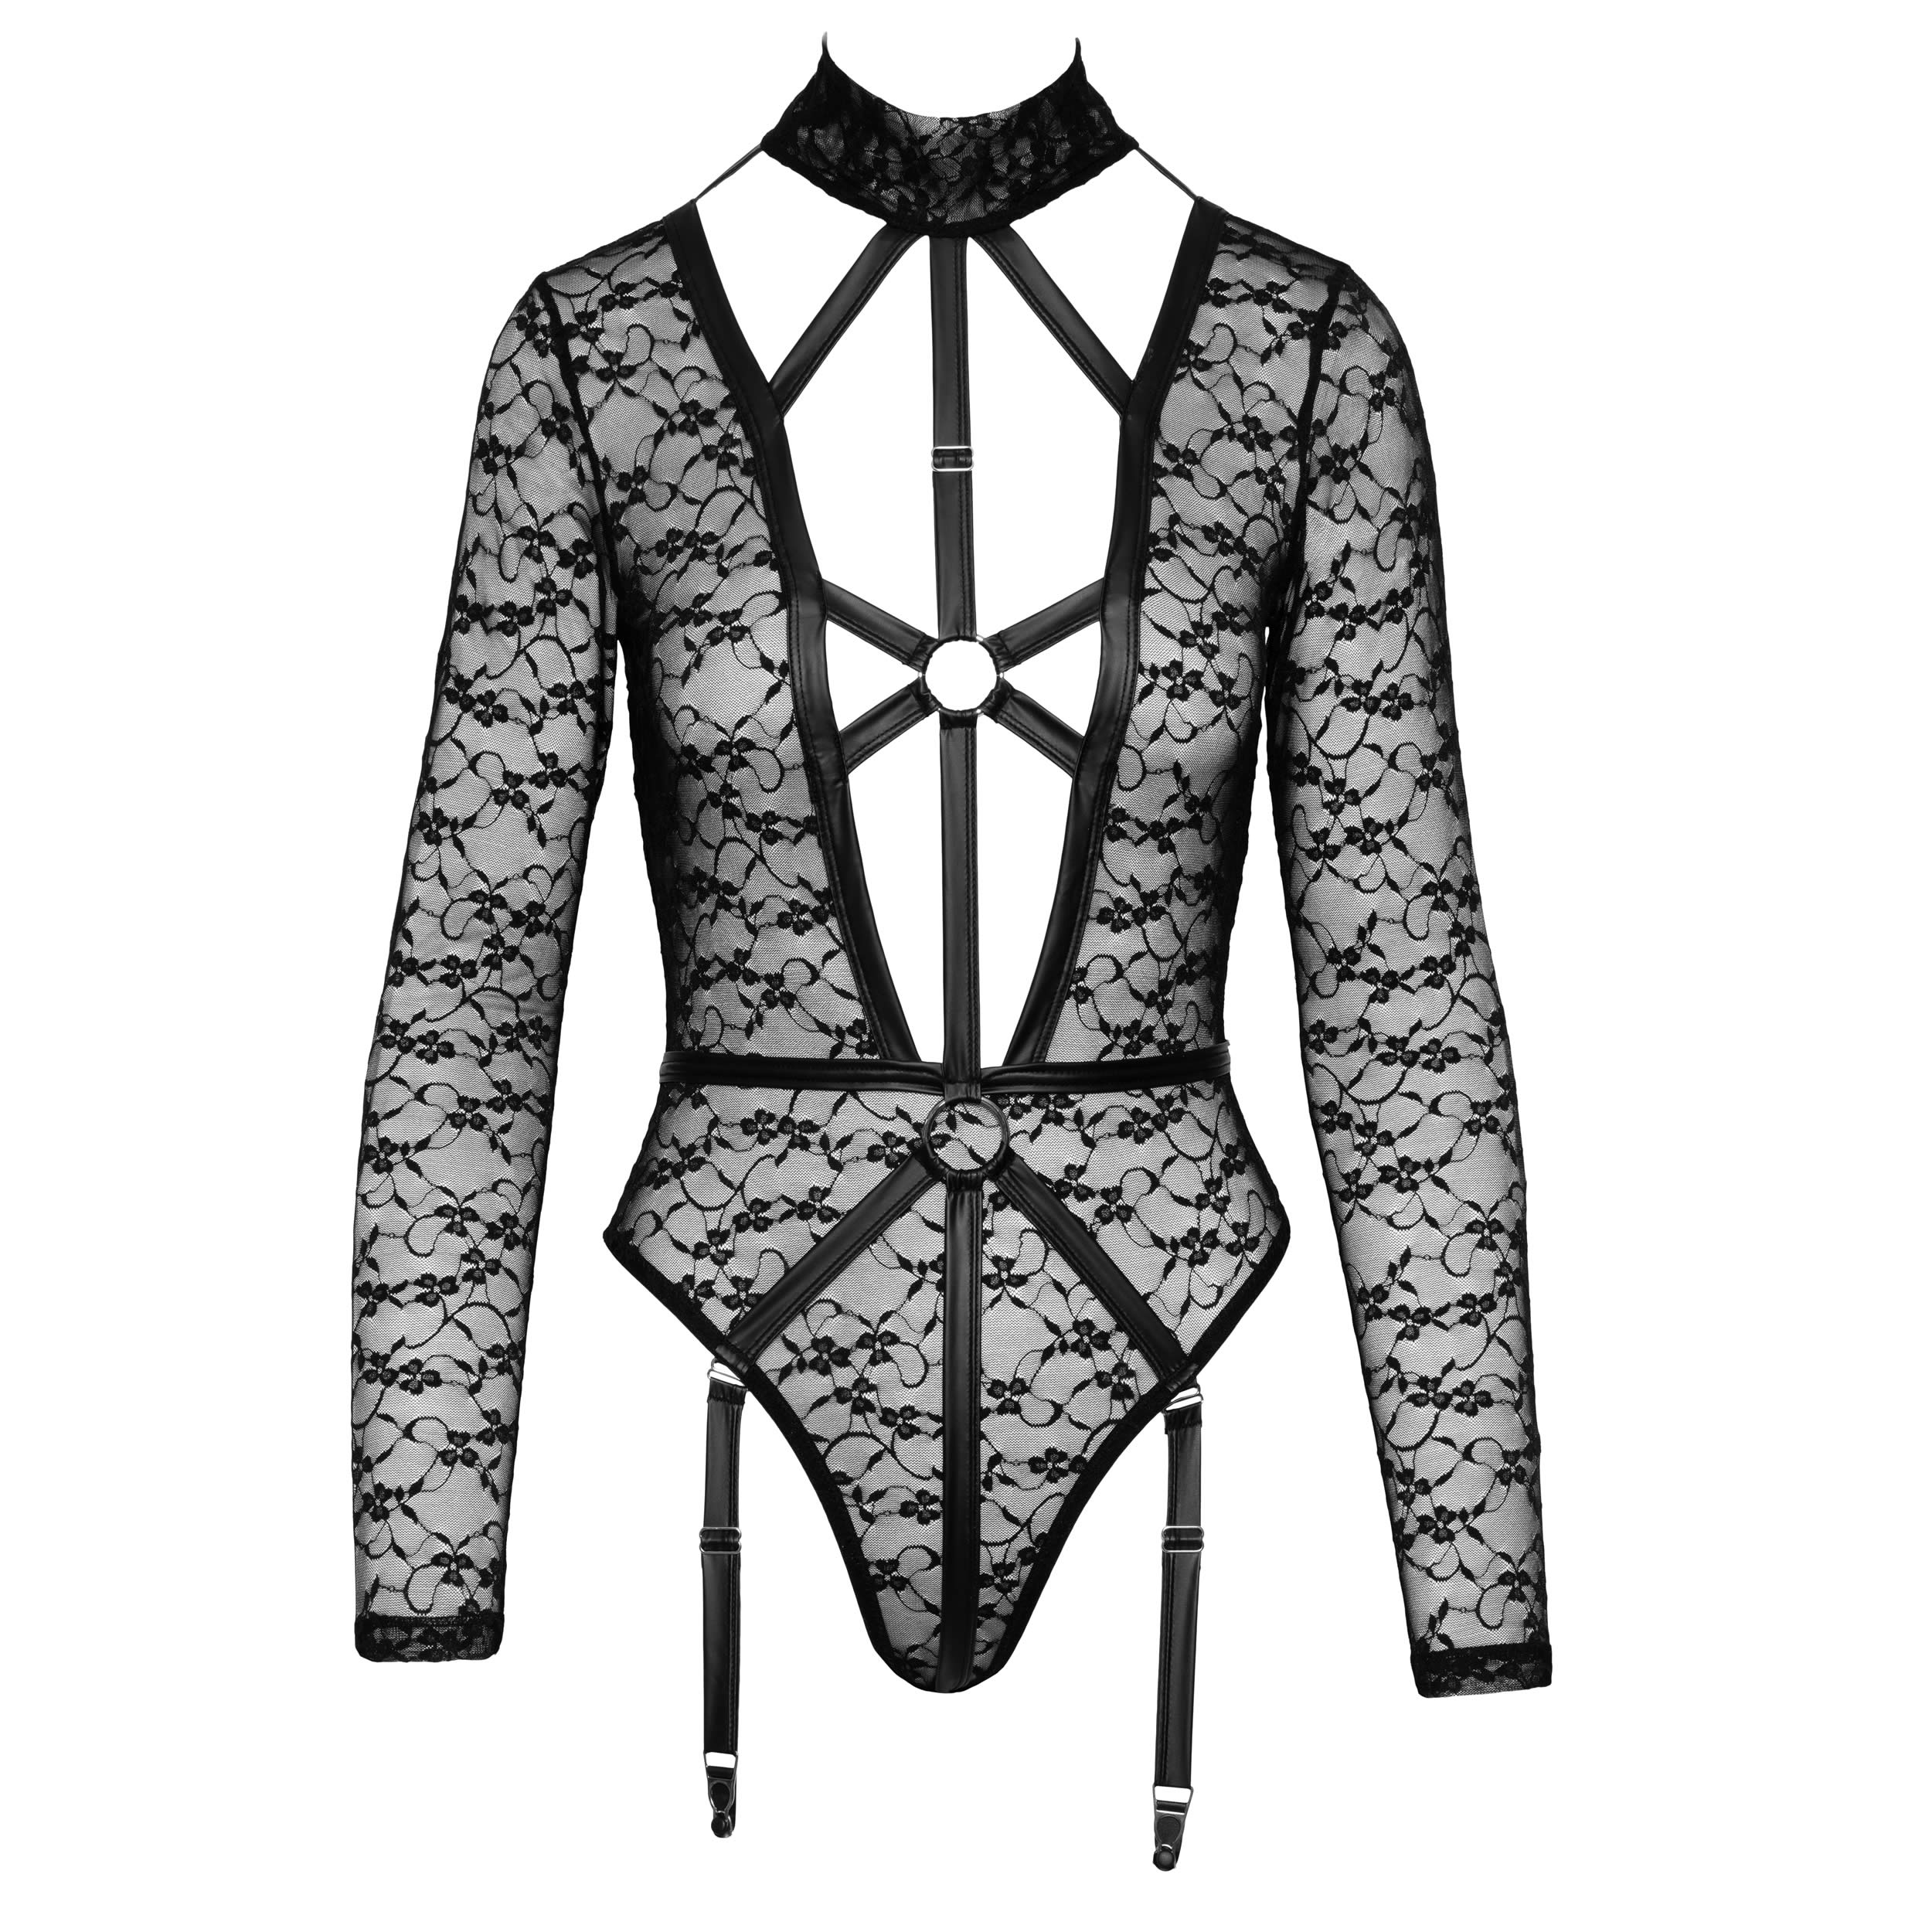 Lace Body with Wetlook Harness and Suspenders